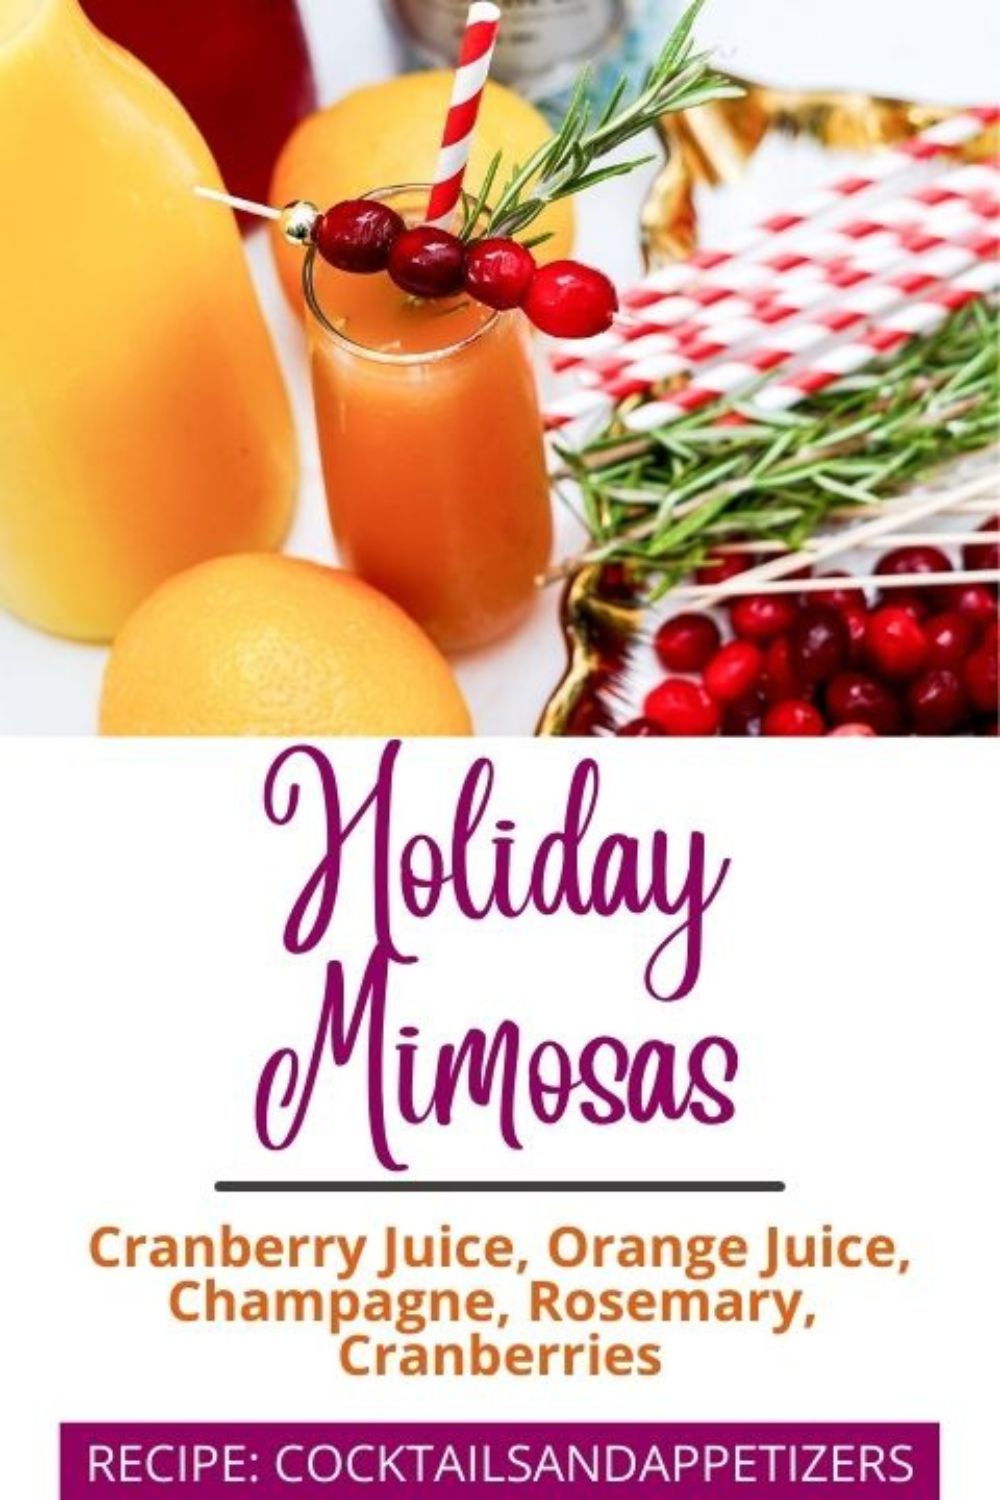 Holiday Mimosa garnished with cranberries